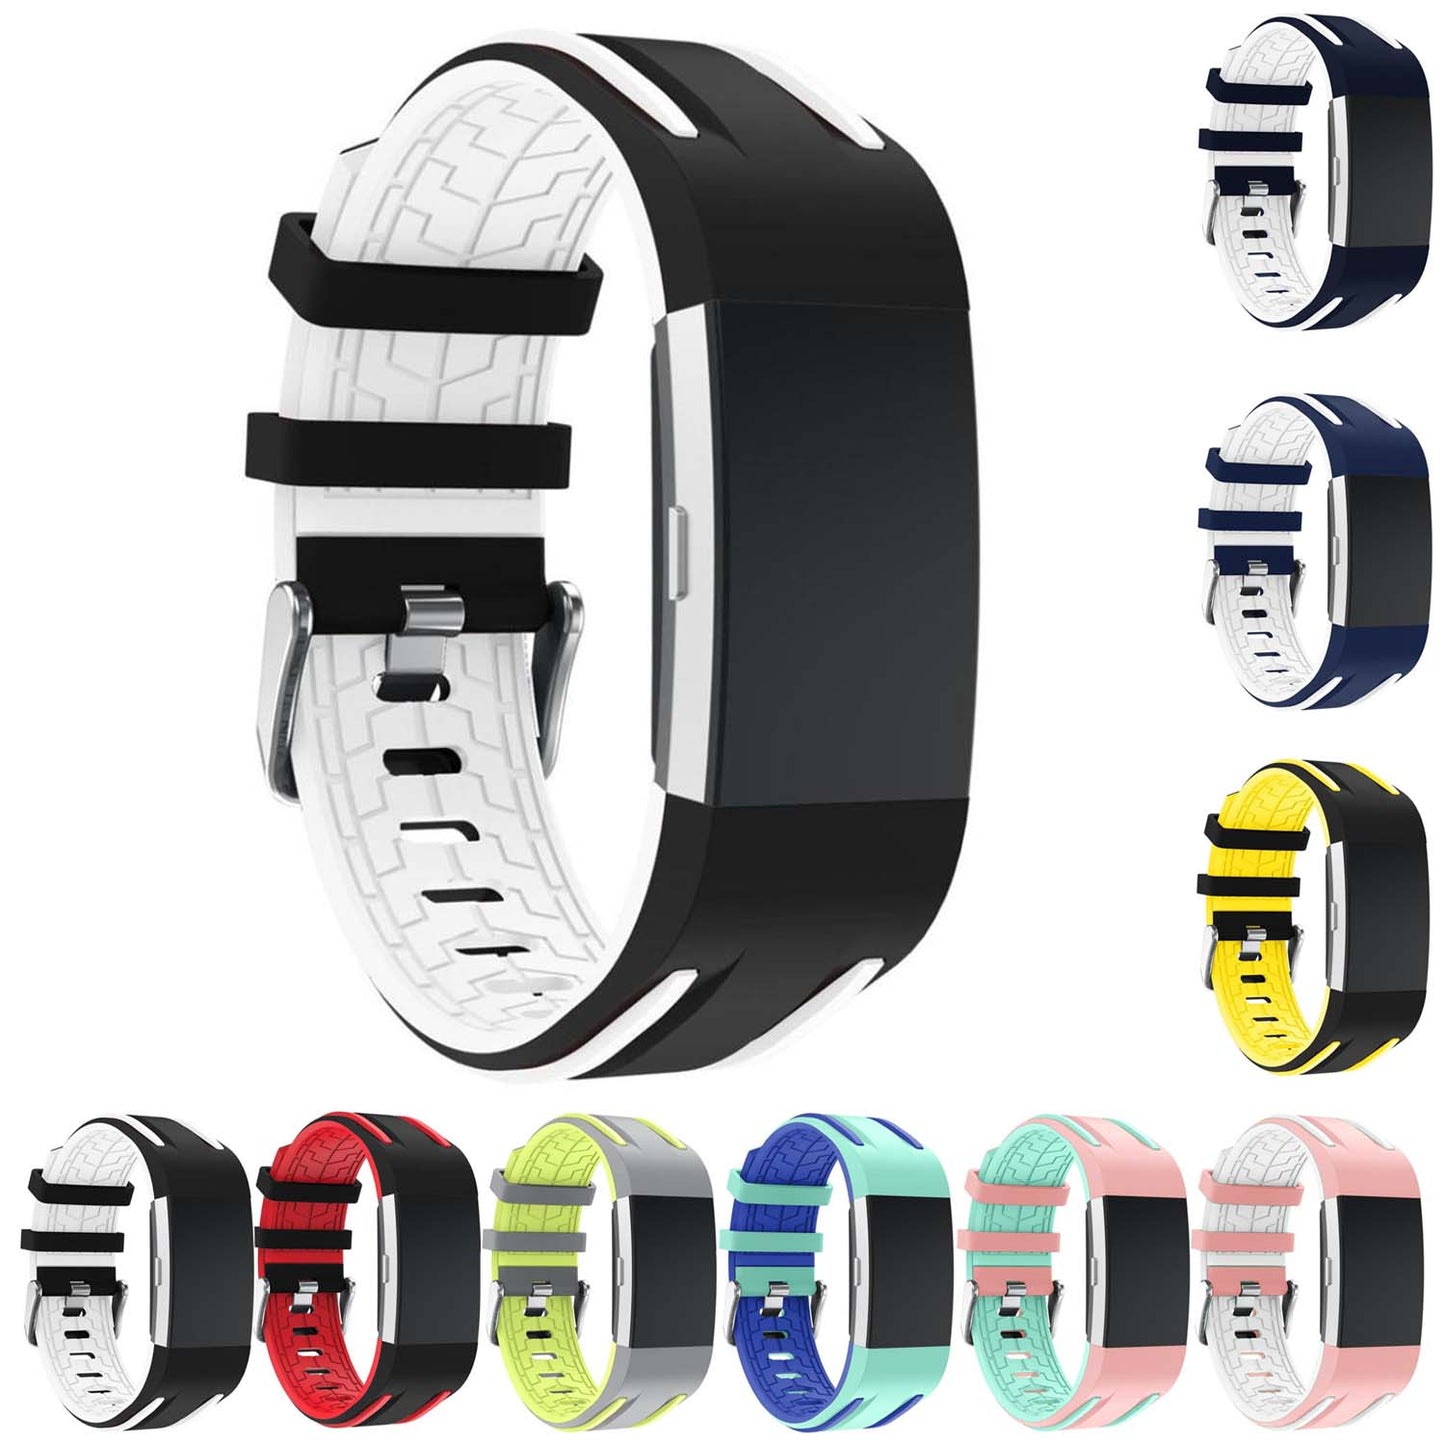 Racing Stripe Rubber Band for Fitbit Ionic